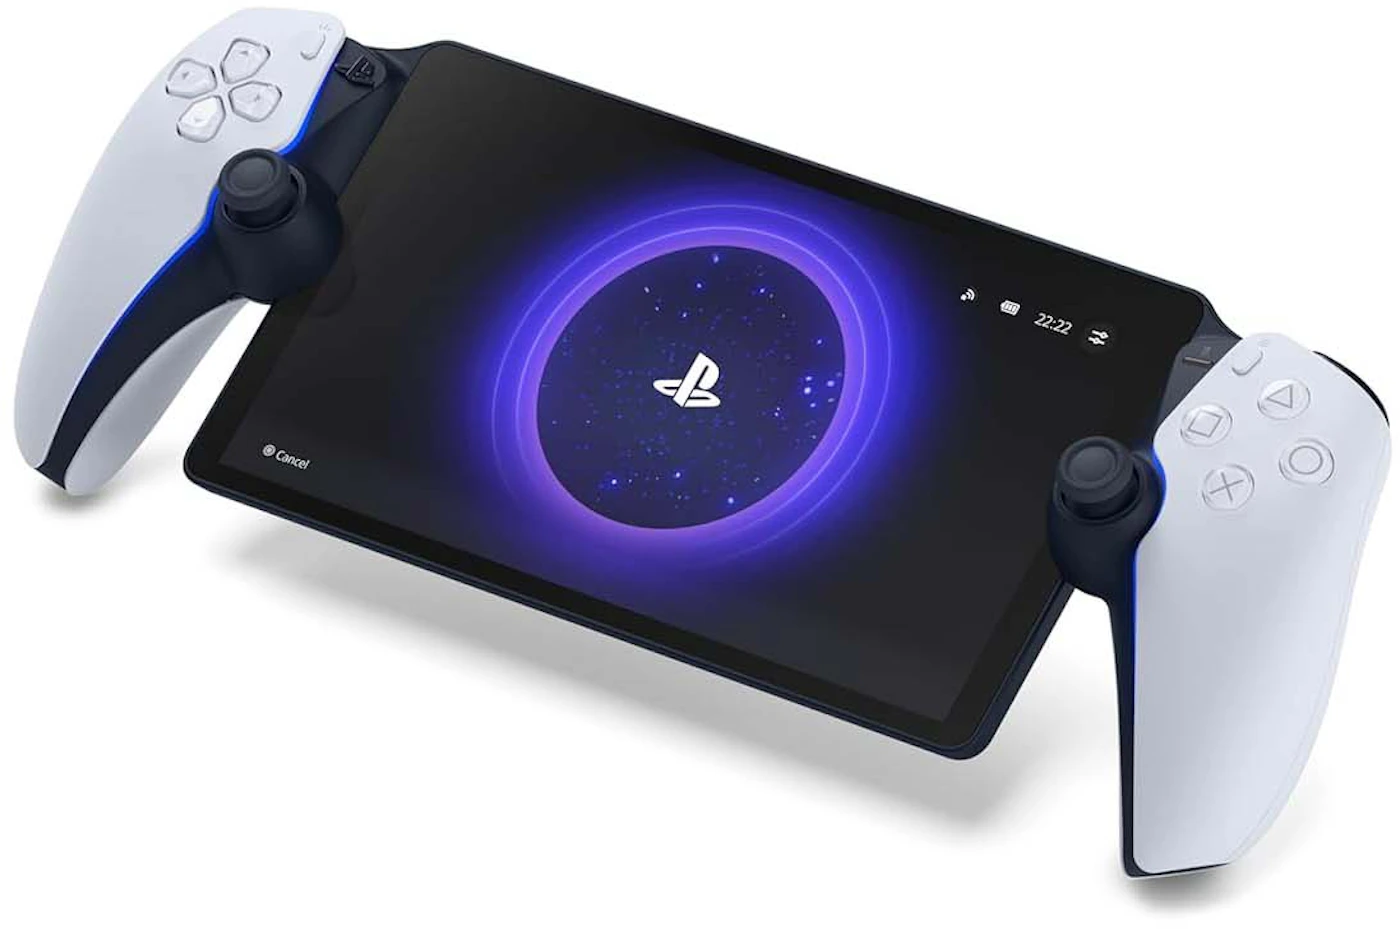 Sony's portable PlayStation Portal launches on November 15th for